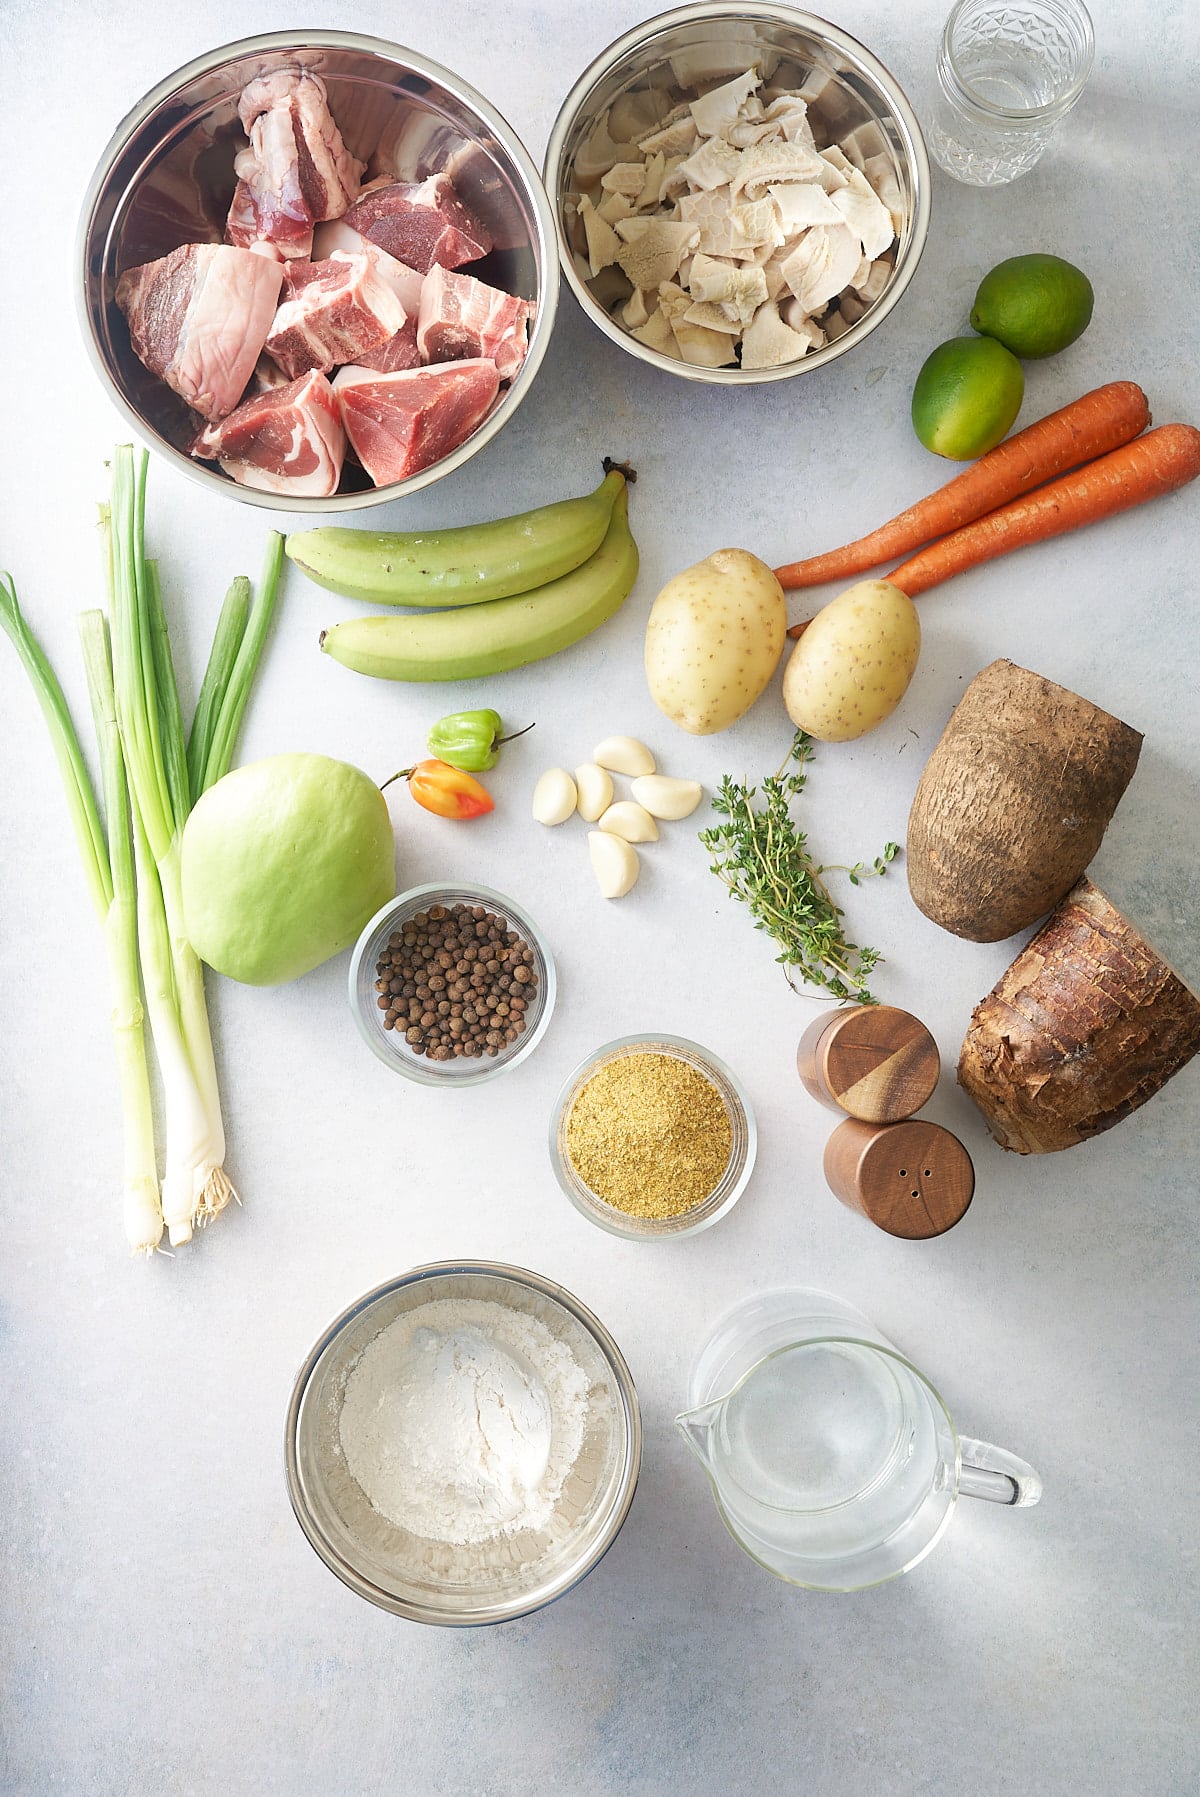 A variety of recipe ingredients including meat, vegetables, spices and herbs, along with flour and water.